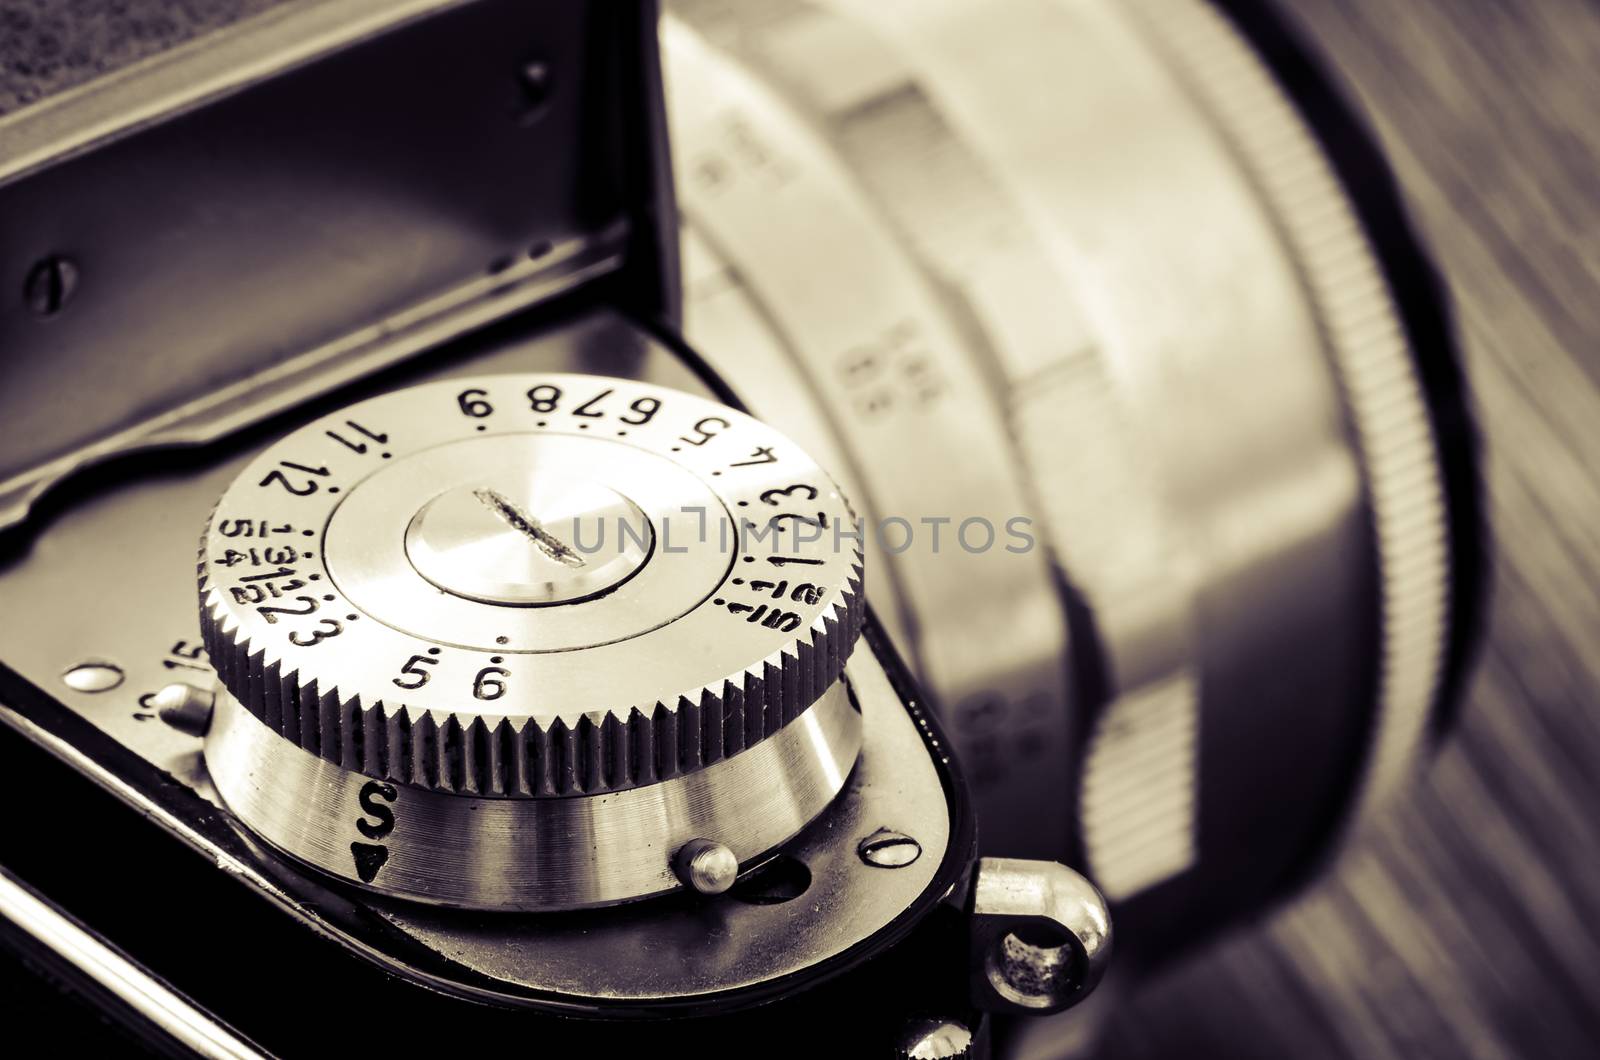 Detail of old classic camera mechanical dials in vintage style